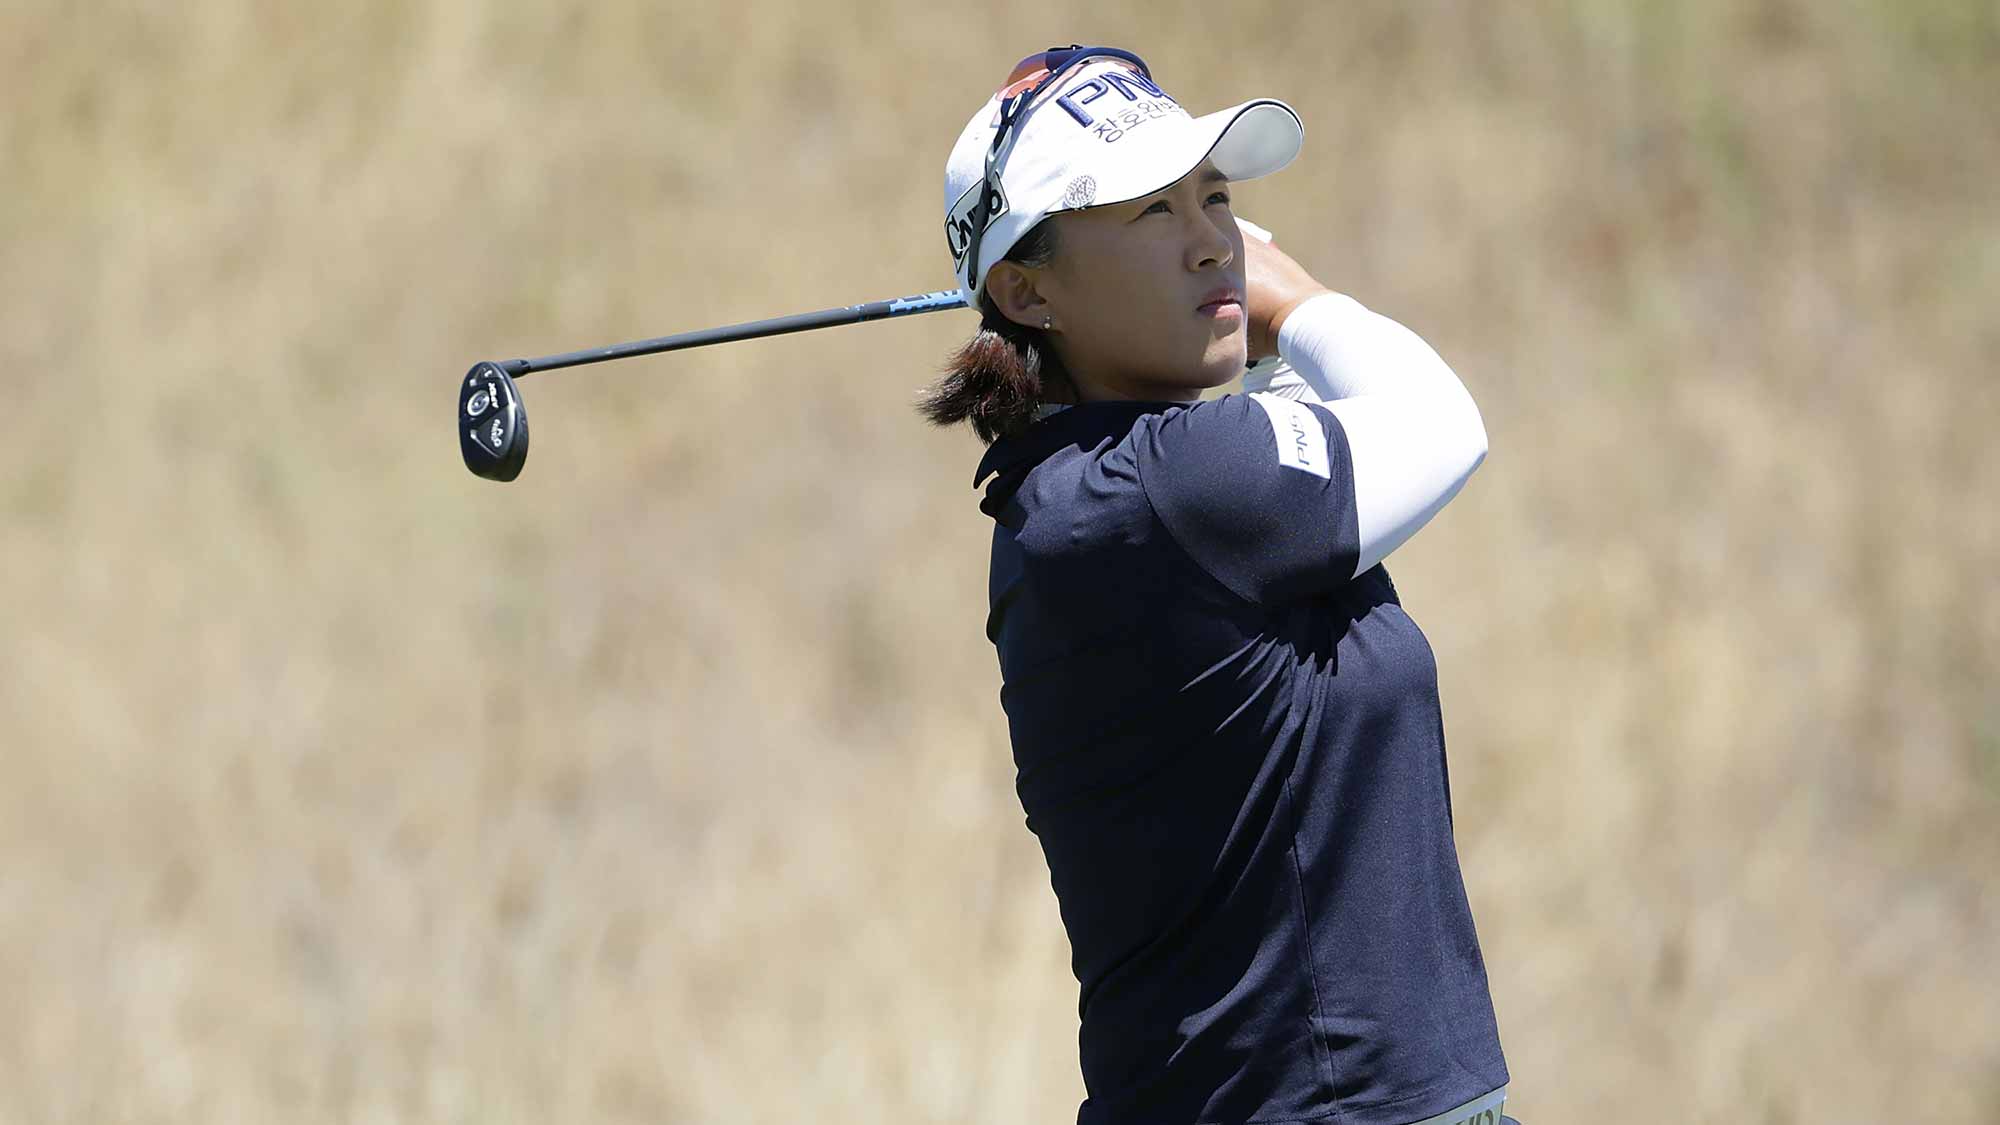 Amy Yang on the sixth hole during the third round of the U.S. Women's Open at the CordeValle Golf Club